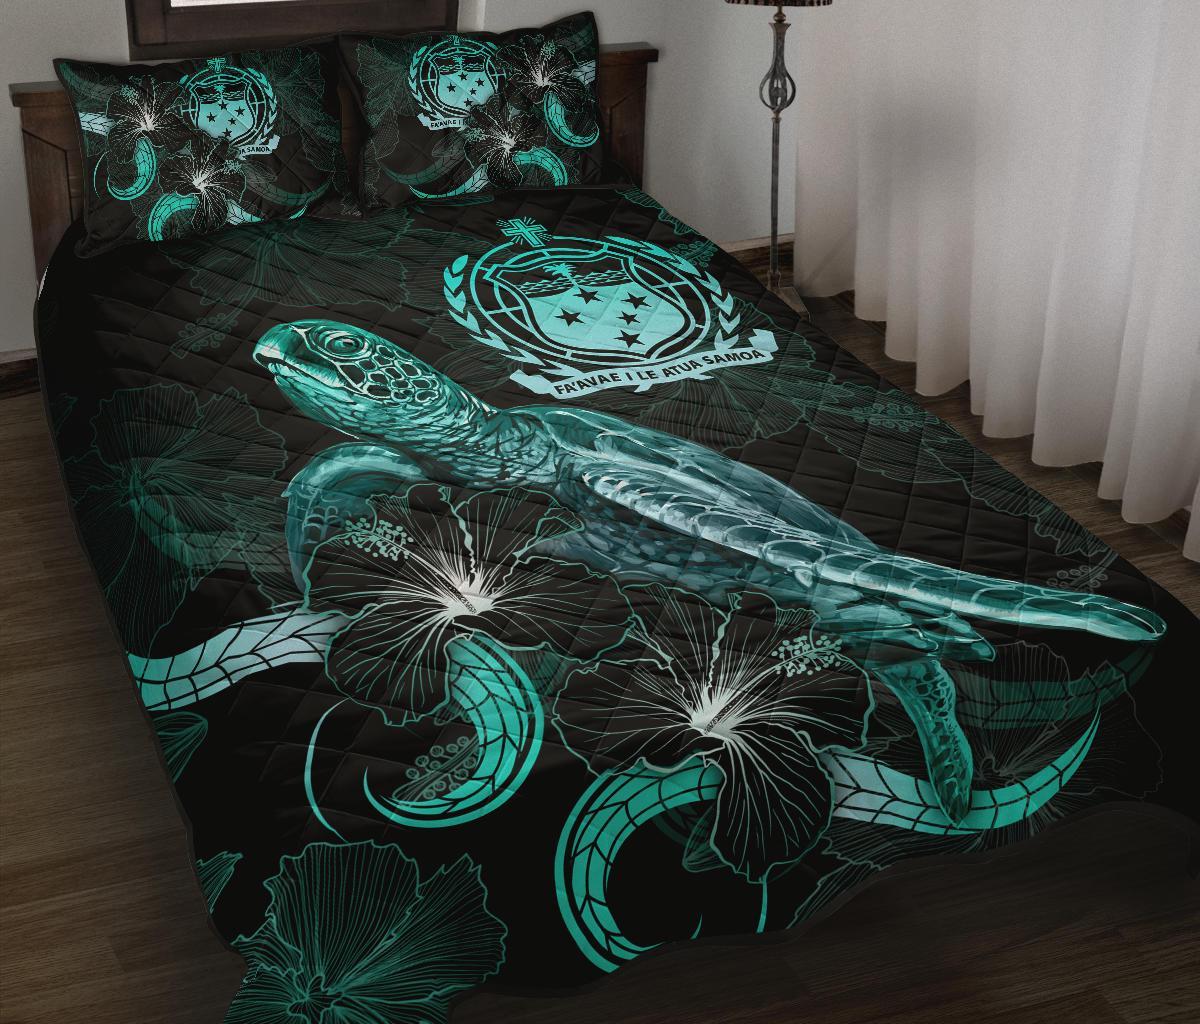 Samoa Polynesian Quilt Bed Set - Turtle With Blooming Hibiscus Turquoise Turquoise - Polynesian Pride